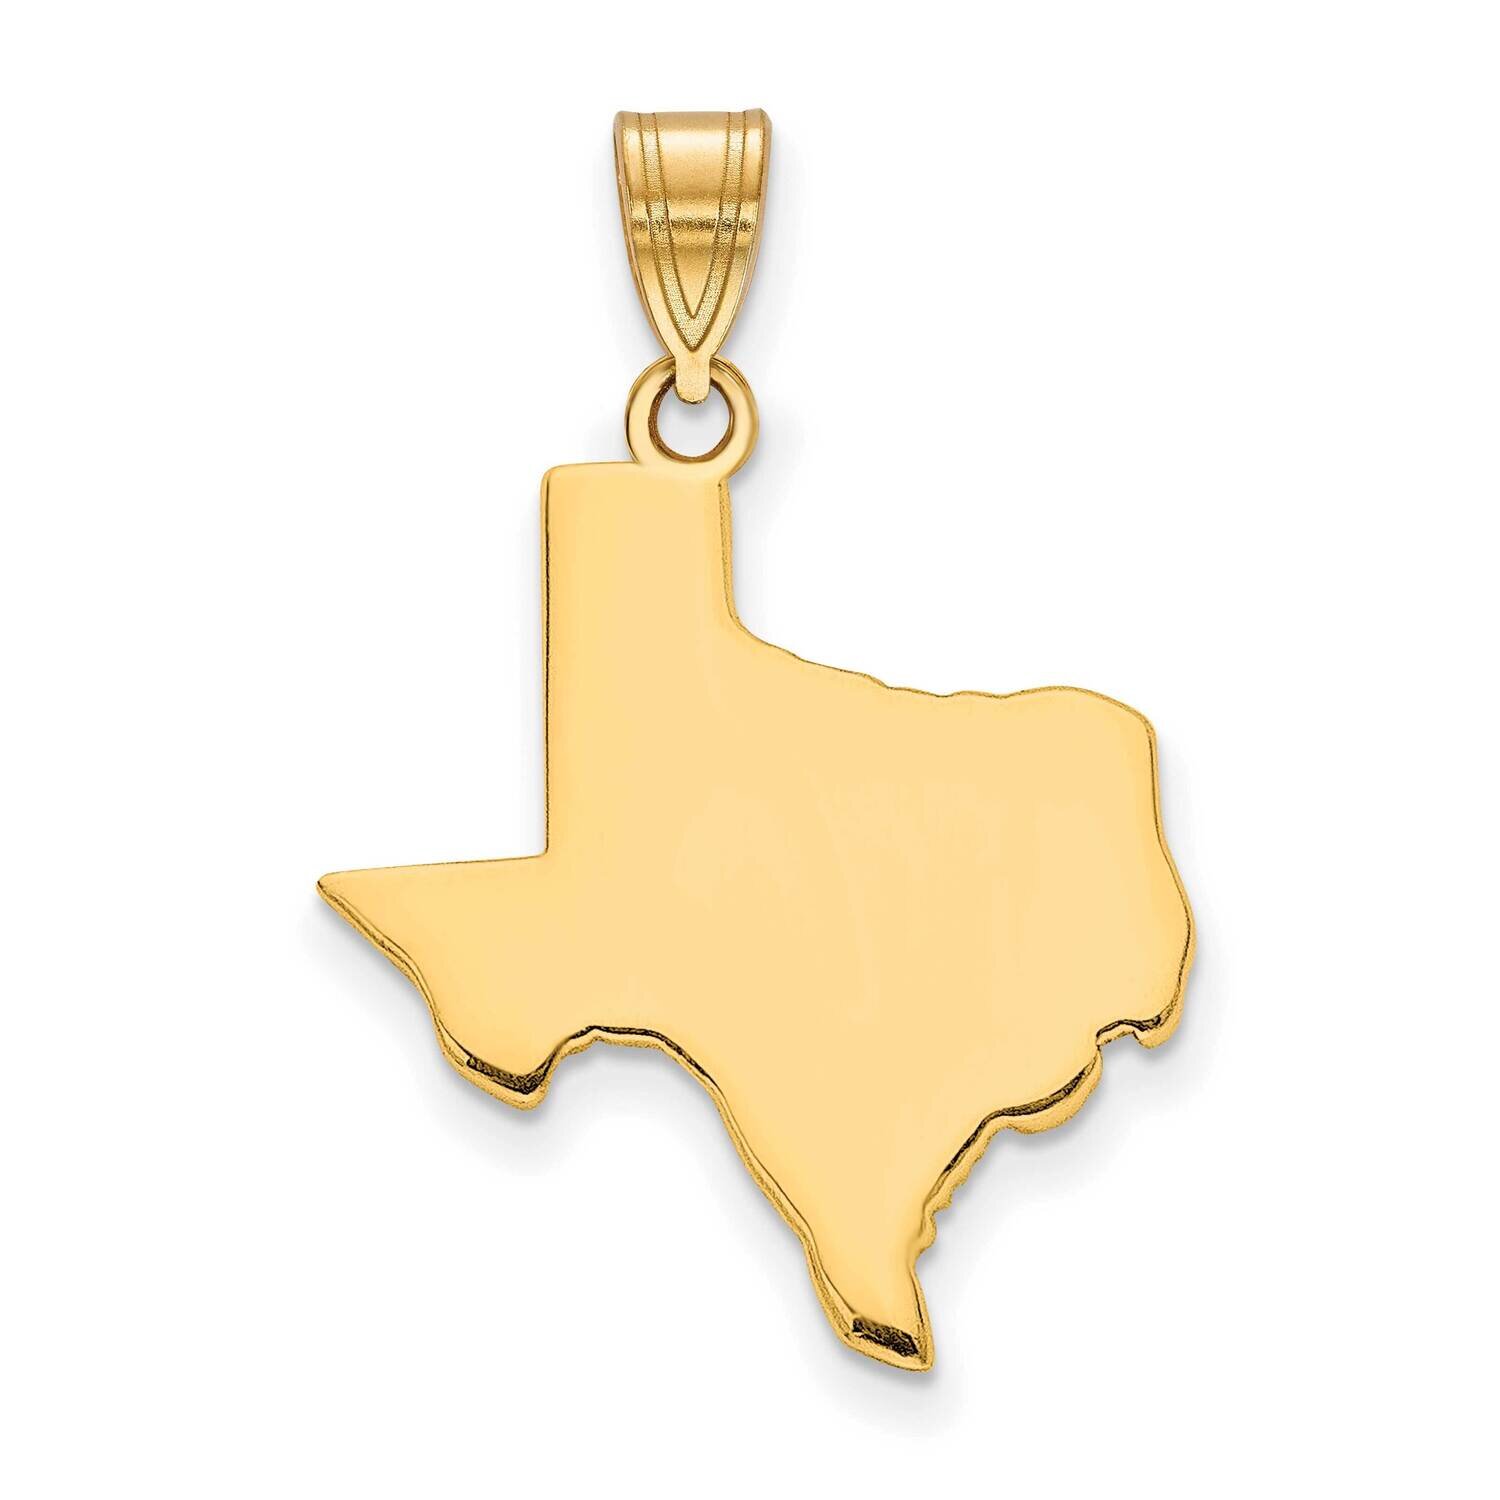 Tx State Pendant Bail Only 14k Gold XNA707Y-TX